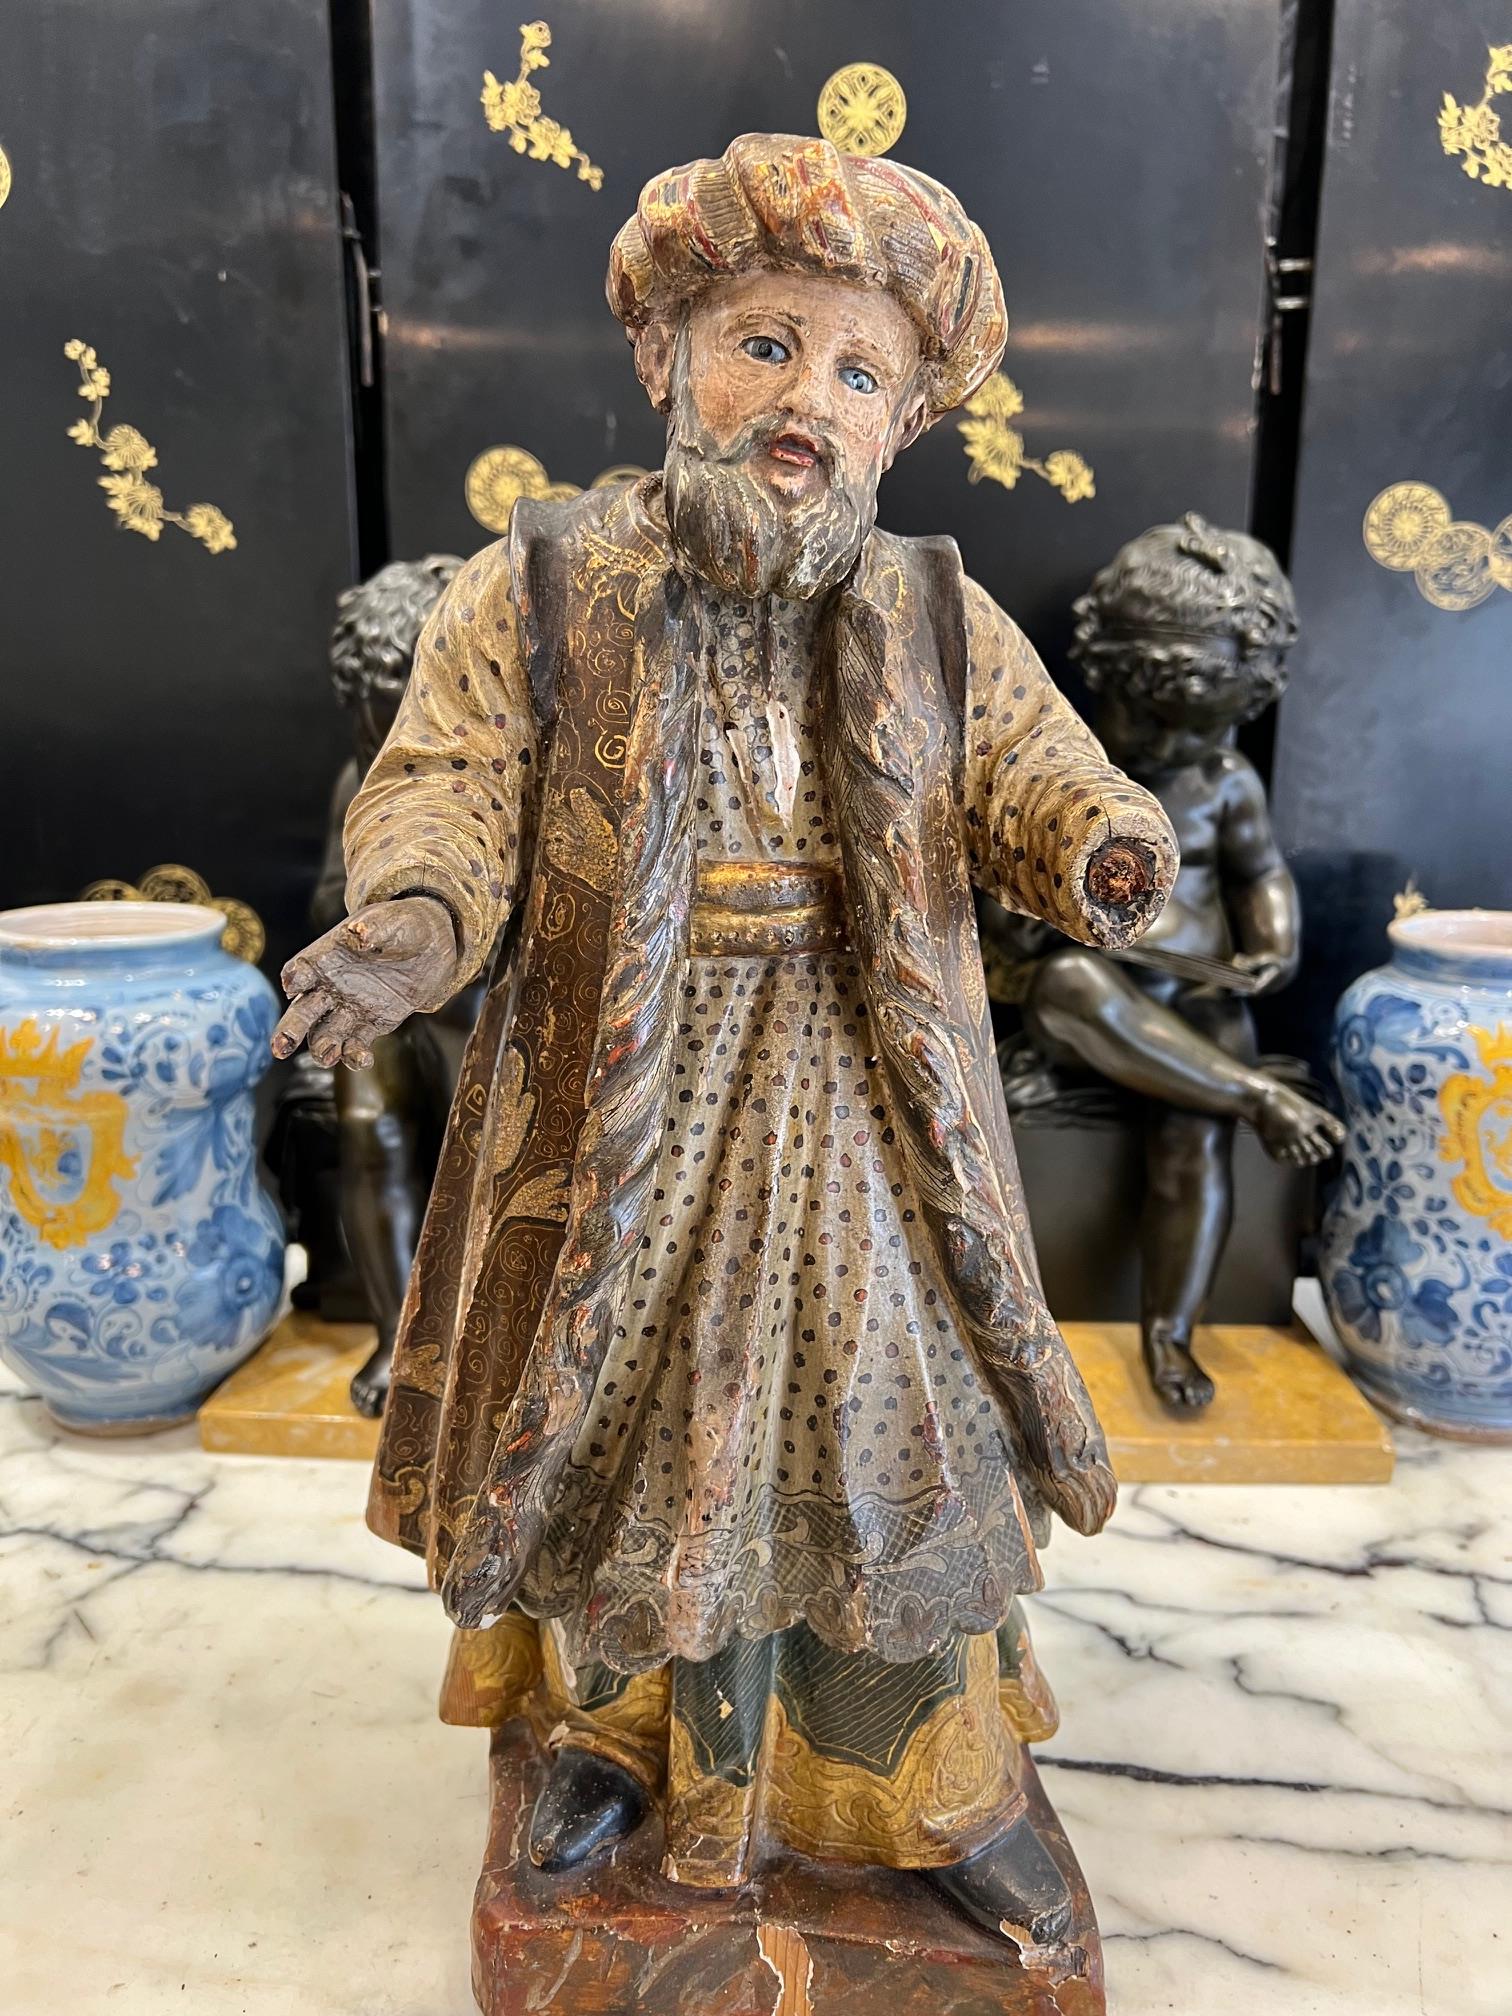 A RARE 18TH CENTURY ITALIAN POLYCHROME DECORATED FIGURE OF AN OTTOMAN - Image 6 of 7